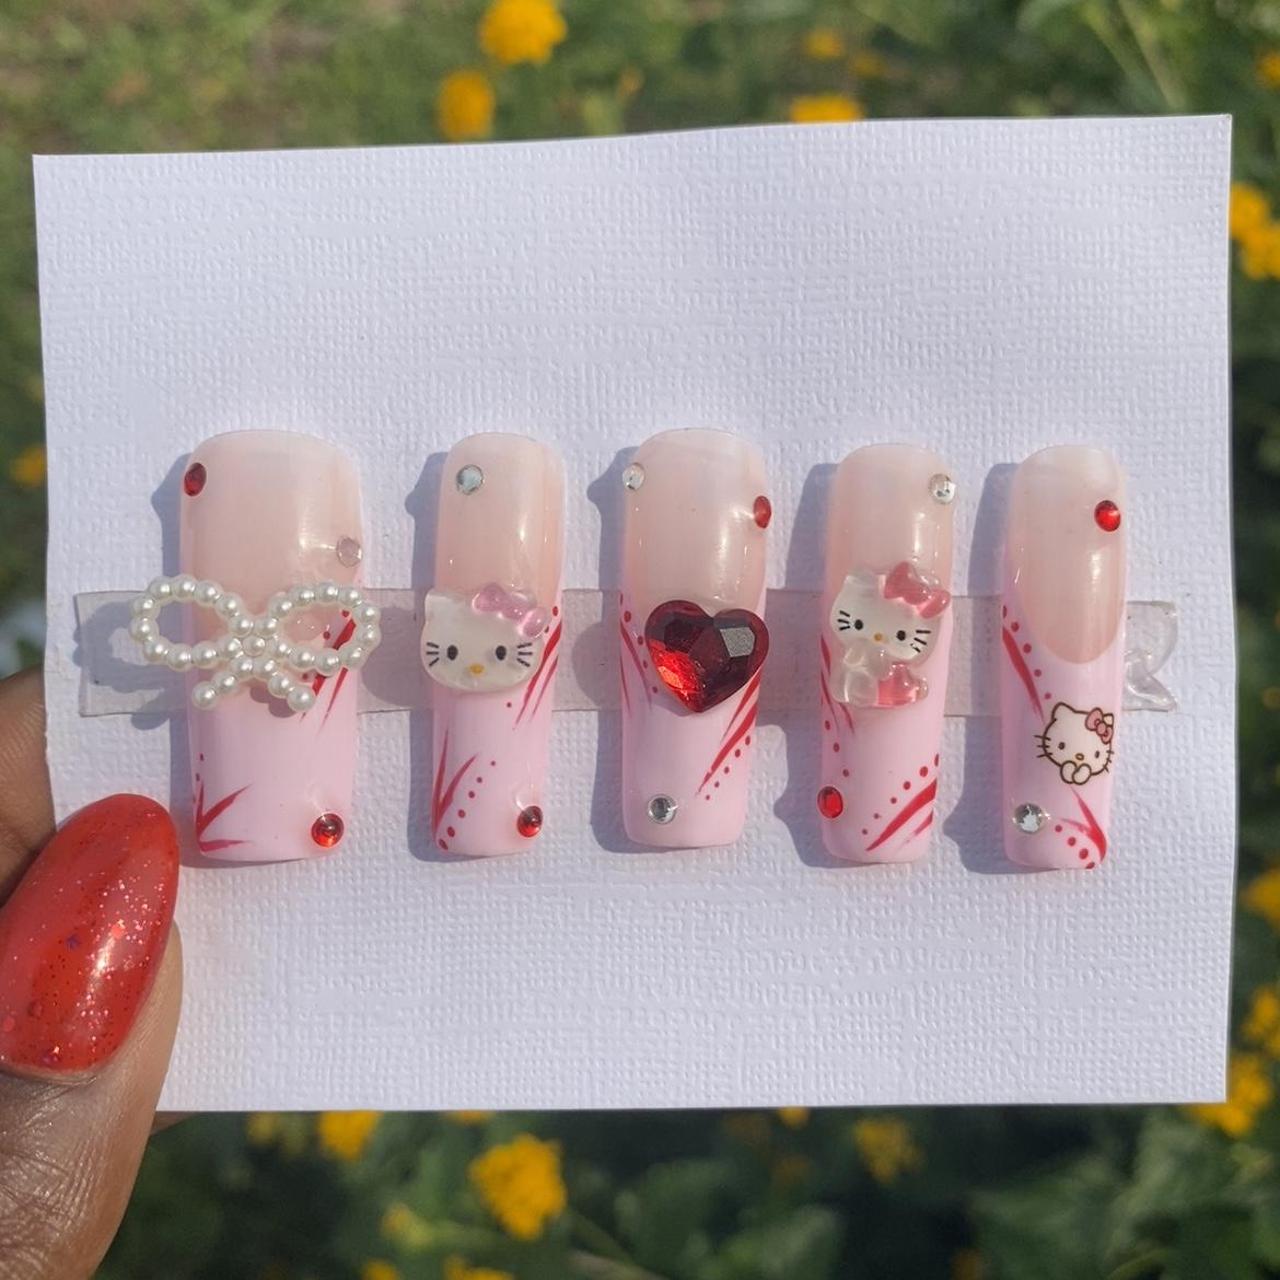 hello kitty nails are one of my favorite types of sets to do💖 #nailinspo  #explore #explorepage #nails #hellokitty #hellokittynails #p... | Instagram